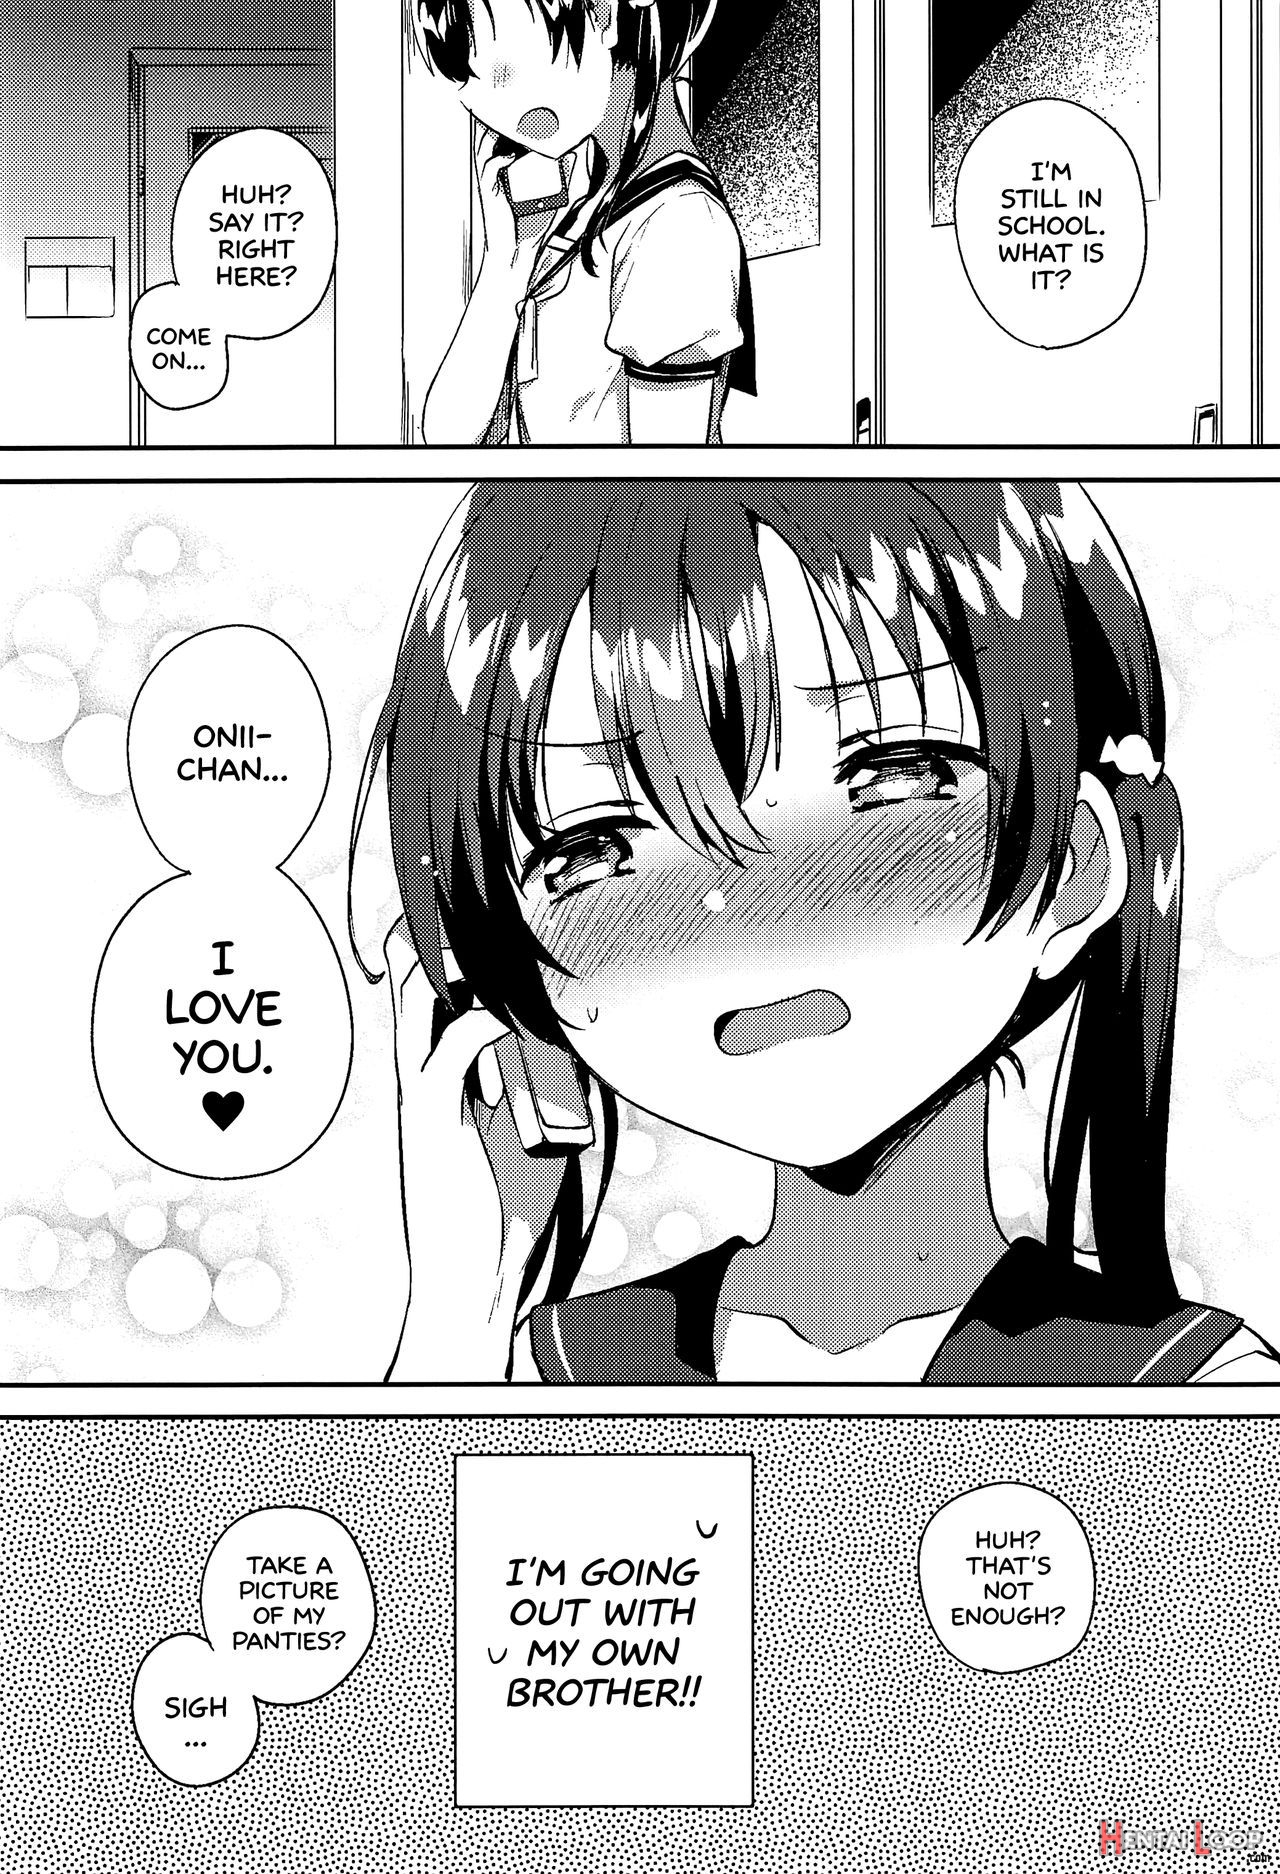 Page 7 of Having Sex With Your Little Sister? Thats Gross! (by Ichihaya)